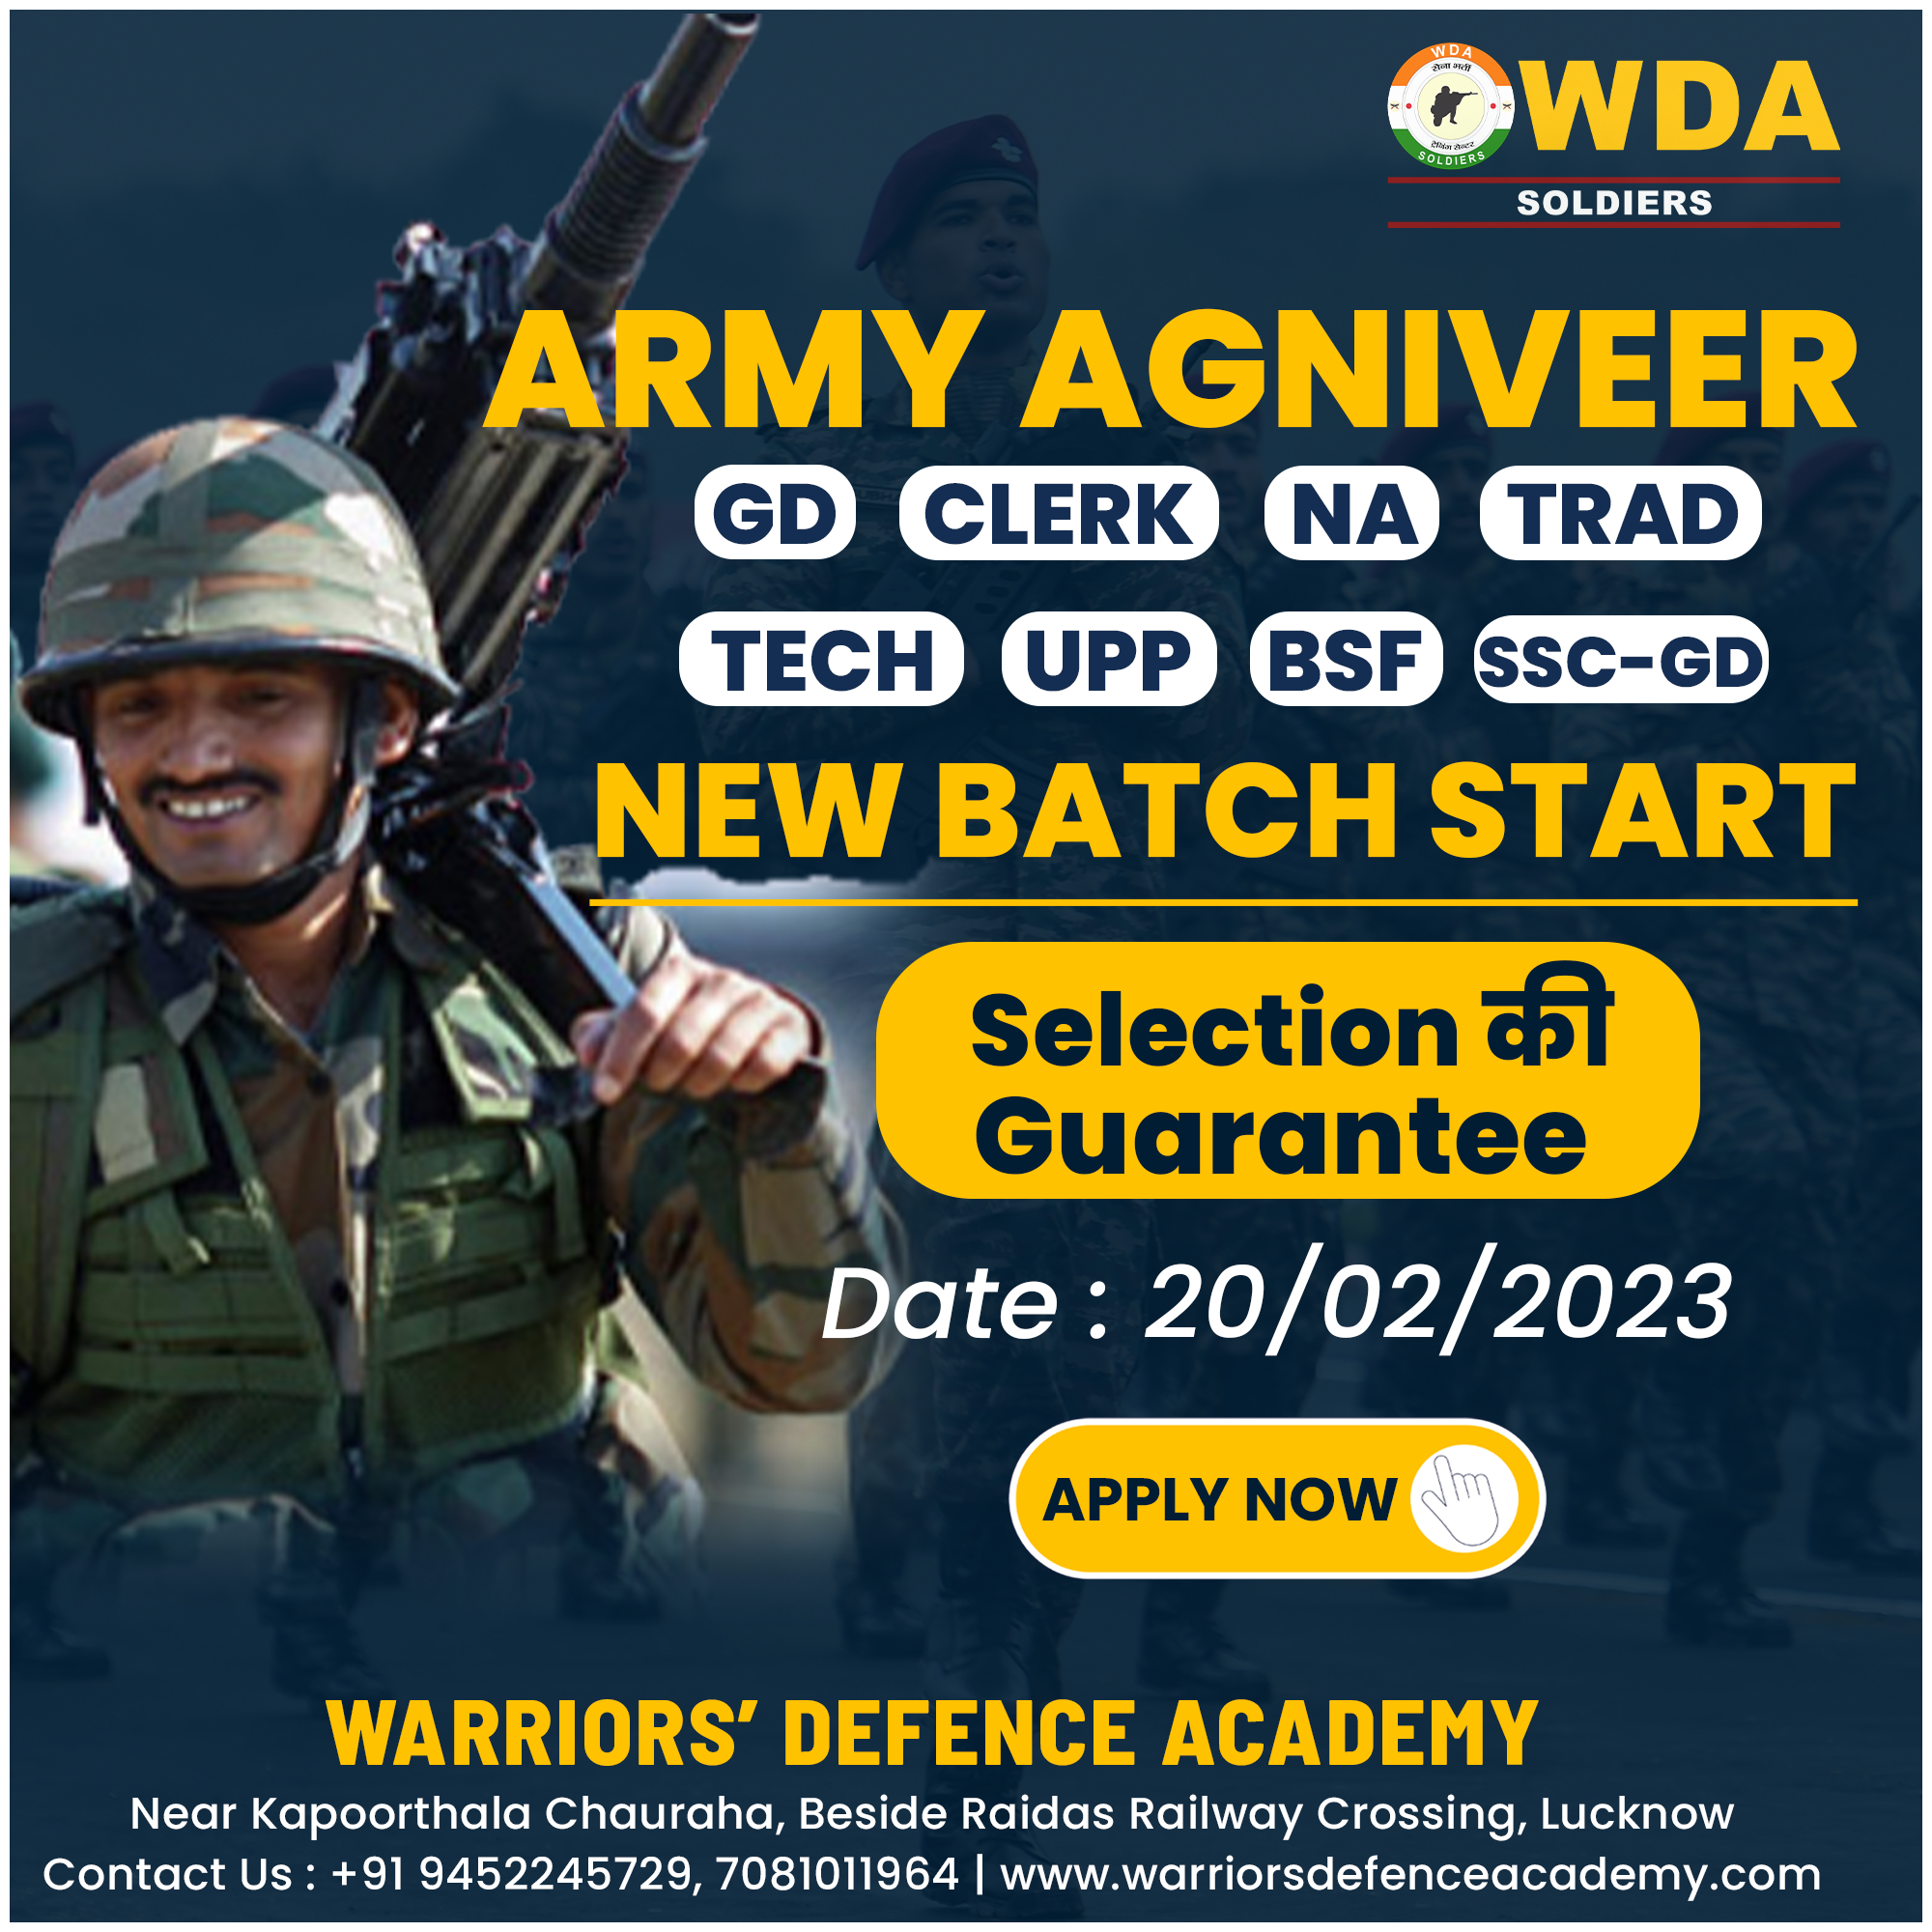 Army Agniveer | Army Group C Recruitment 2023